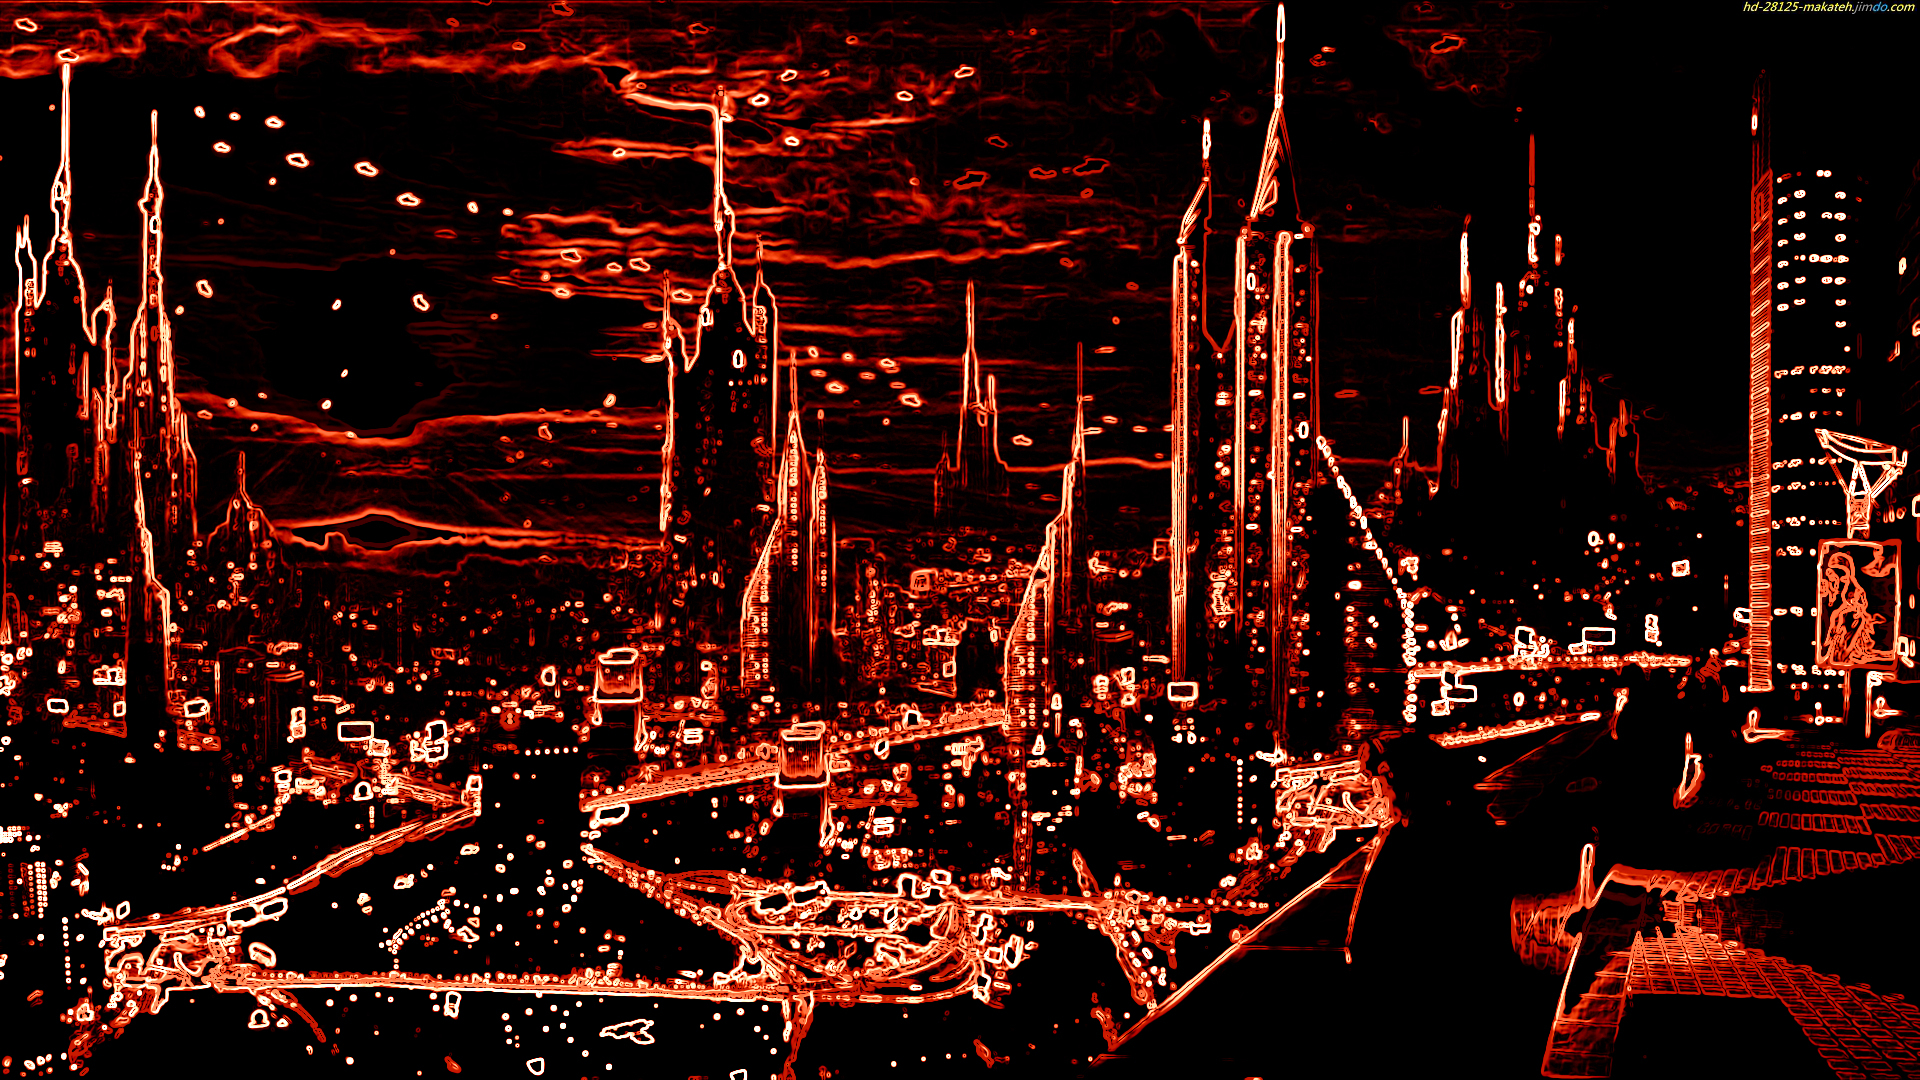 Space City Background